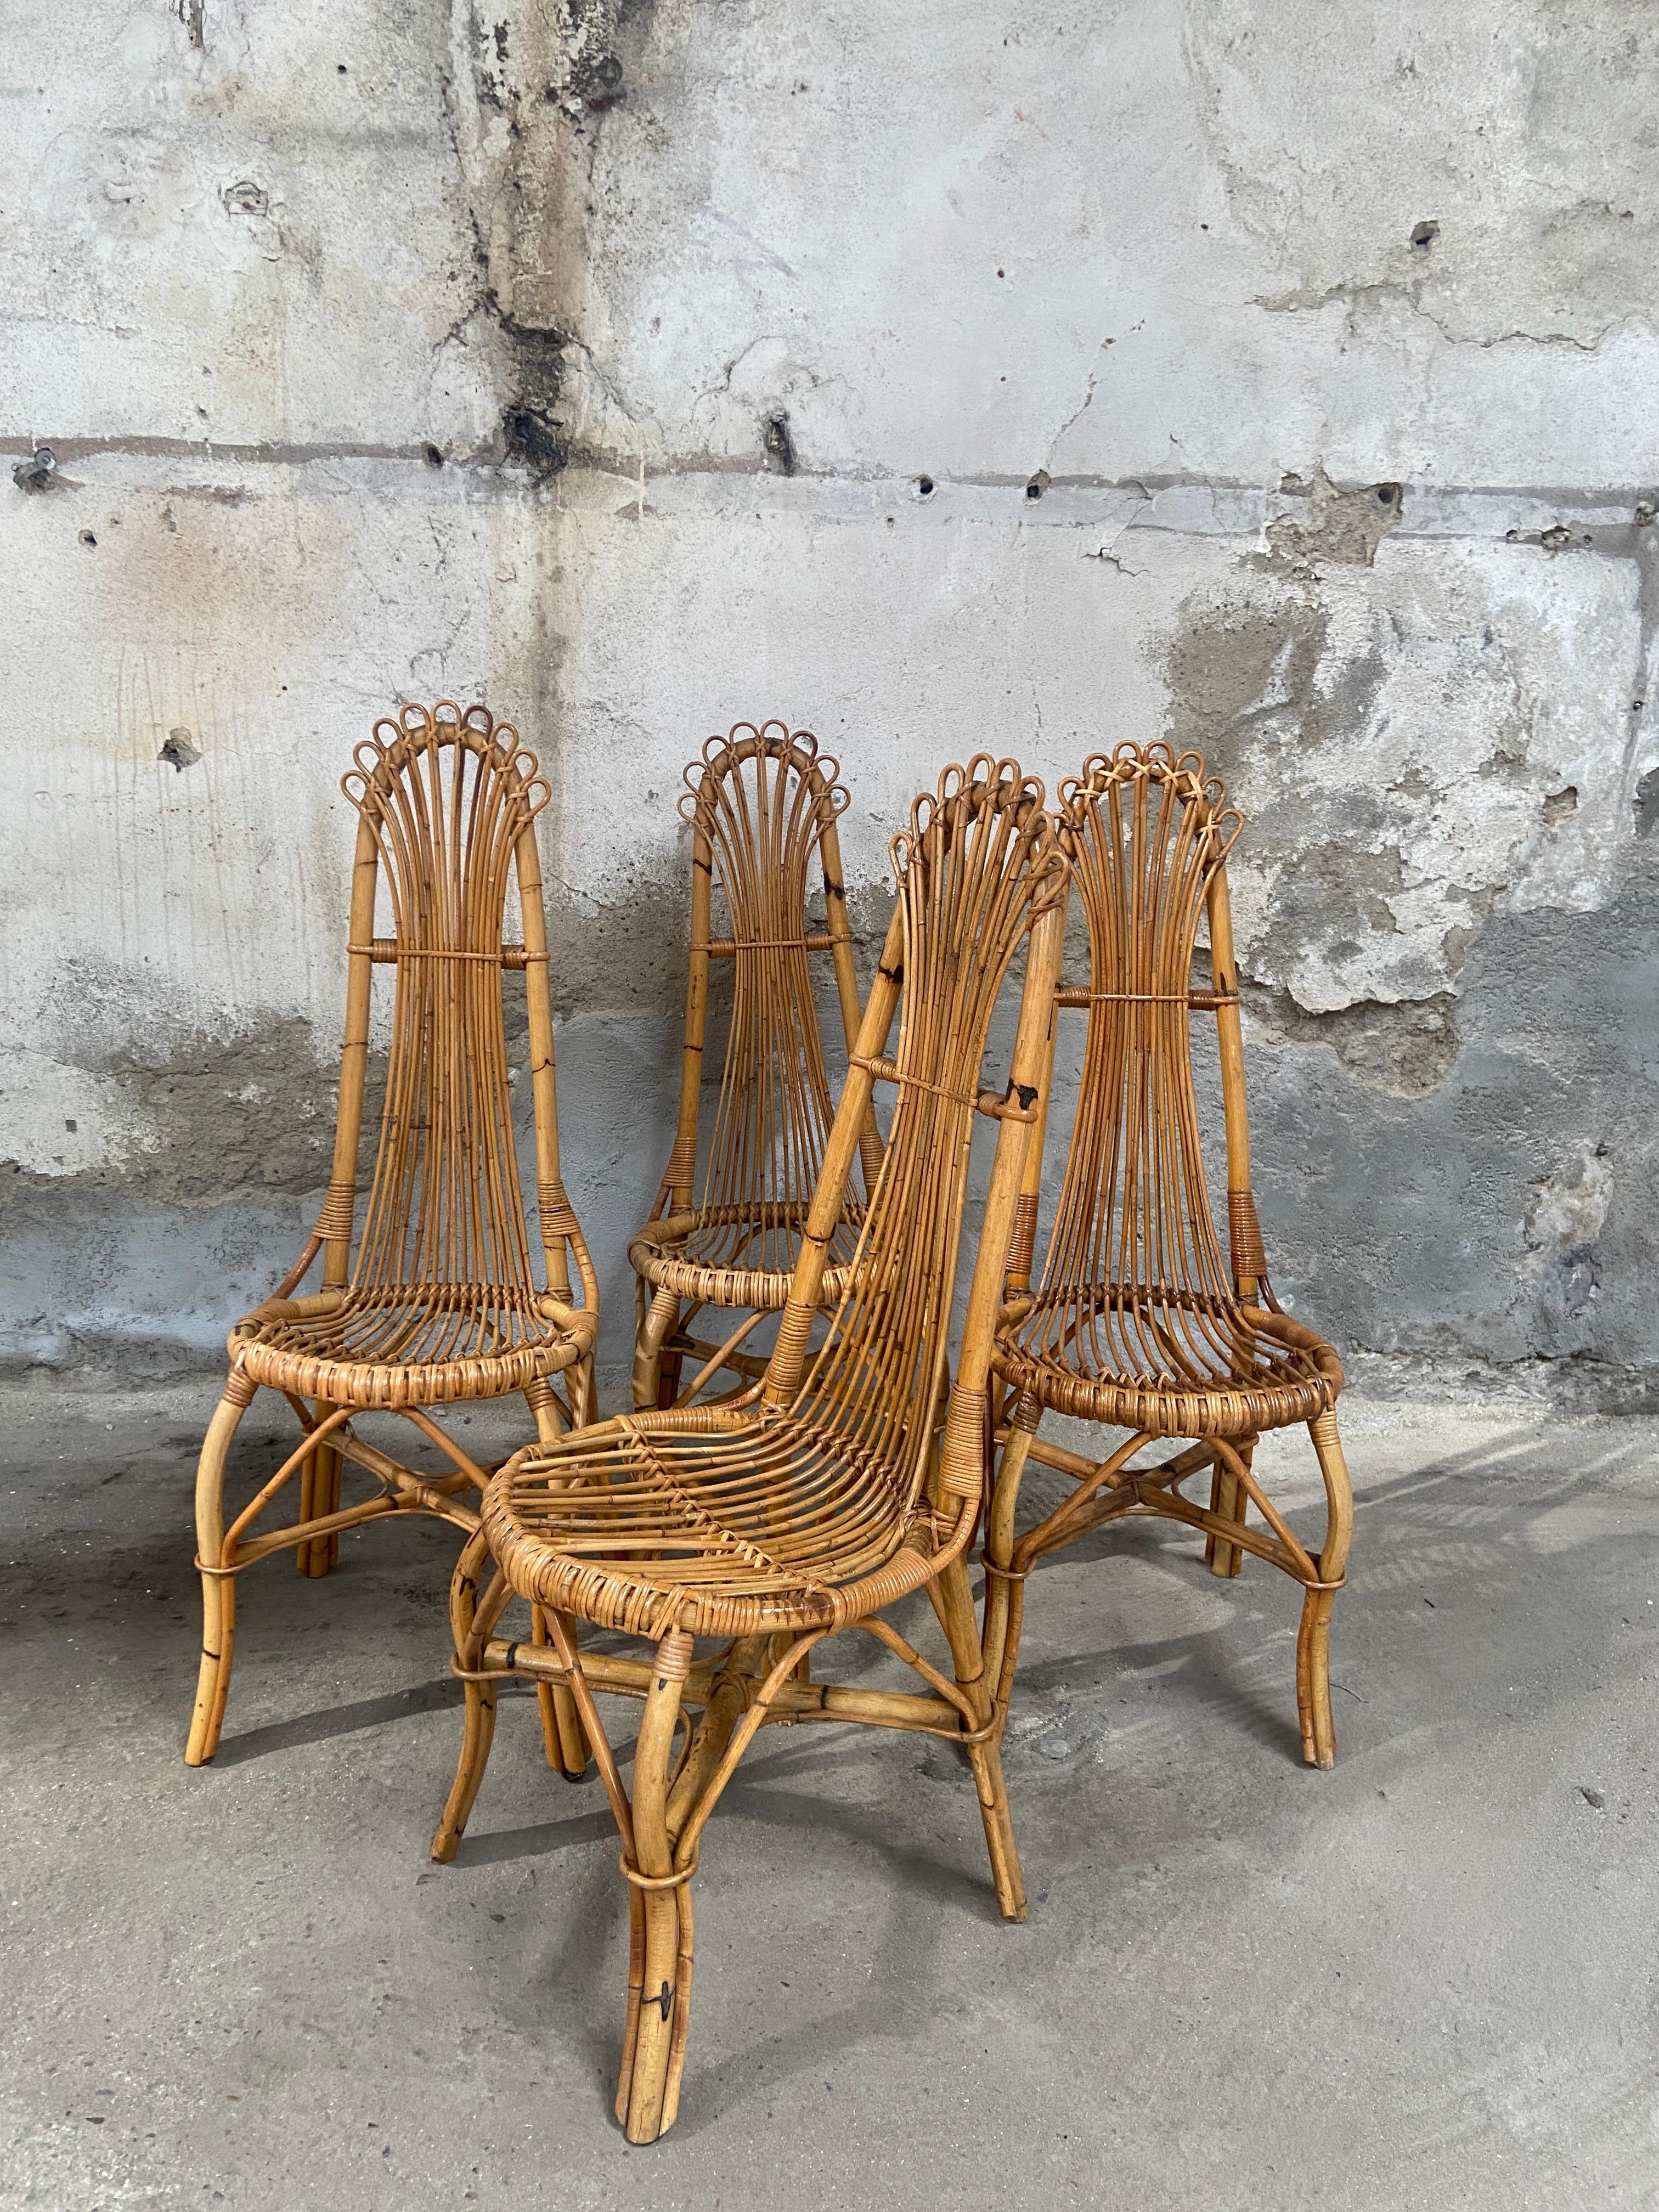 Mid-Century Modern Set of 4 Bamboo Chairs from the French Riviera, 1970s For Sale 1